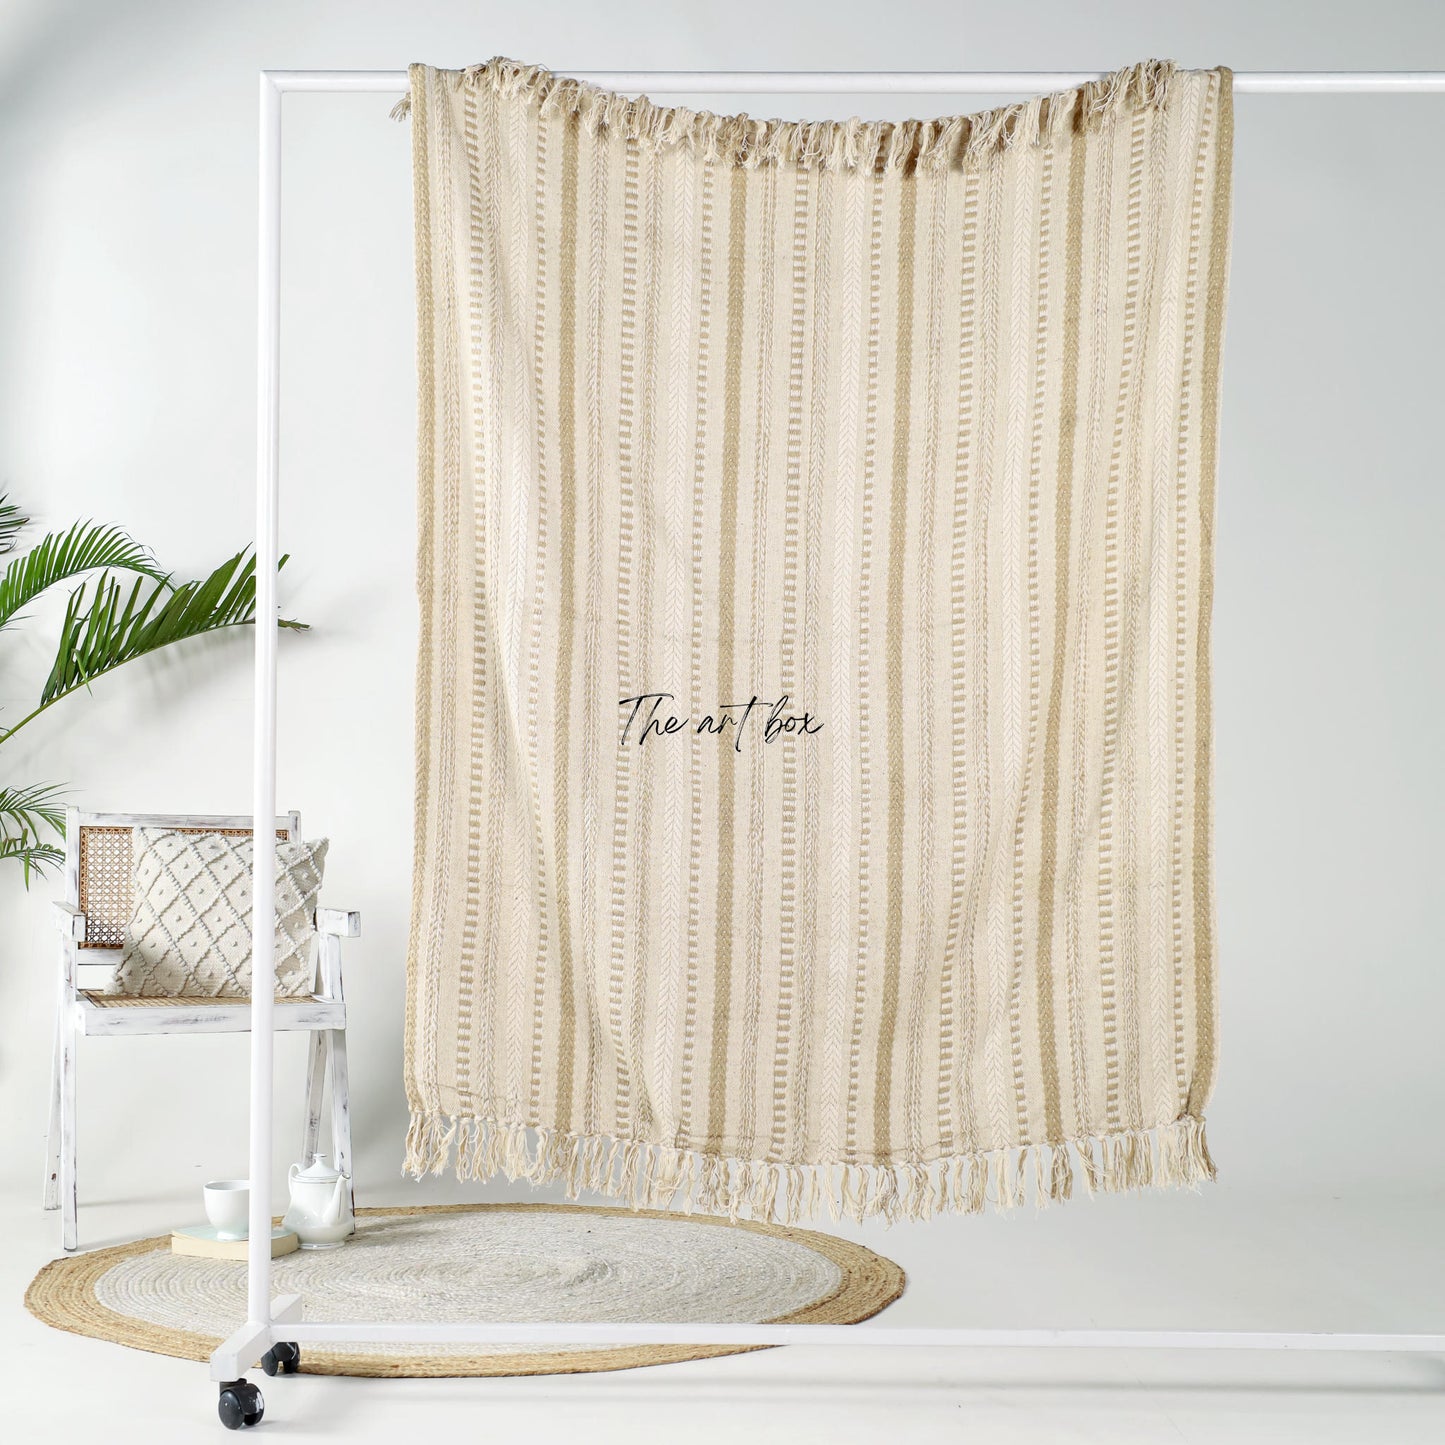 Brown Striped Hand Tufted Throw